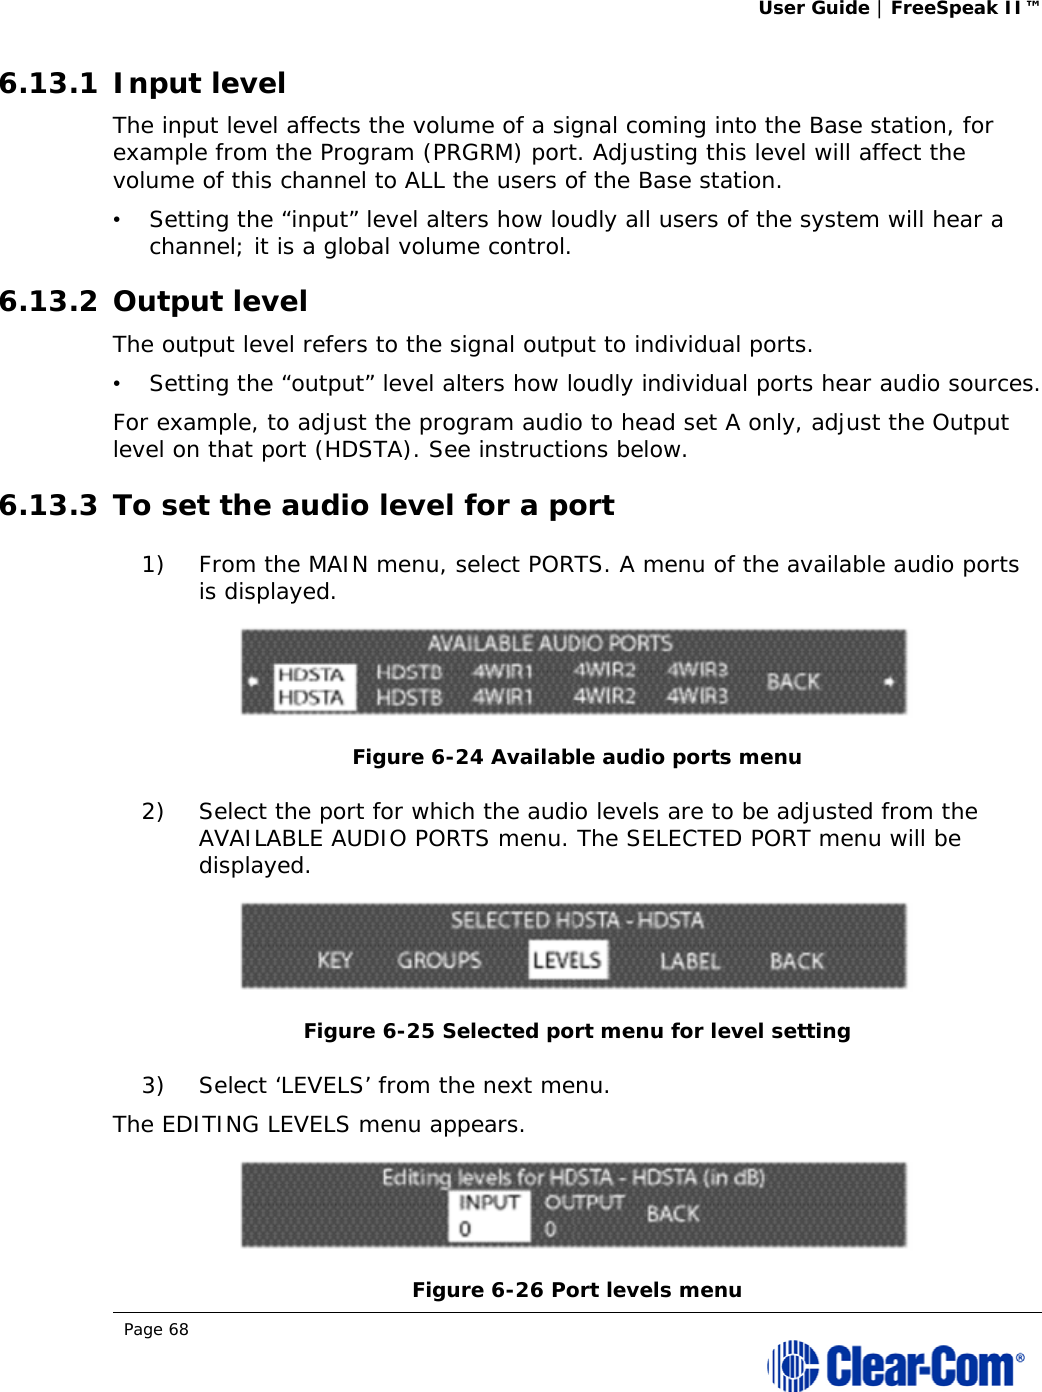 User Guide | FreeSpeak II™  Page 68  6.13.1 Input level The input level affects the volume of a signal coming into the Base station, for example from the Program (PRGRM) port. Adjusting this level will affect the volume of this channel to ALL the users of the Base station.  •   Setting the “input” level alters how loudly all users of the system will hear a channel; it is a global volume control. 6.13.2 Output level The output level refers to the signal output to individual ports.   •   Setting the “output” level alters how loudly individual ports hear audio sources. For example, to adjust the program audio to head set A only, adjust the Output level on that port (HDSTA). See instructions below.  6.13.3 To set the audio level for a port 1) From the MAIN menu, select PORTS. A menu of the available audio ports is displayed.  Figure 6-24 Available audio ports menu 2) Select the port for which the audio levels are to be adjusted from the AVAILABLE AUDIO PORTS menu. The SELECTED PORT menu will be displayed.  Figure 6-25 Selected port menu for level setting 3) Select ‘LEVELS’ from the next menu. The EDITING LEVELS menu appears.   Figure 6-26 Port levels menu 